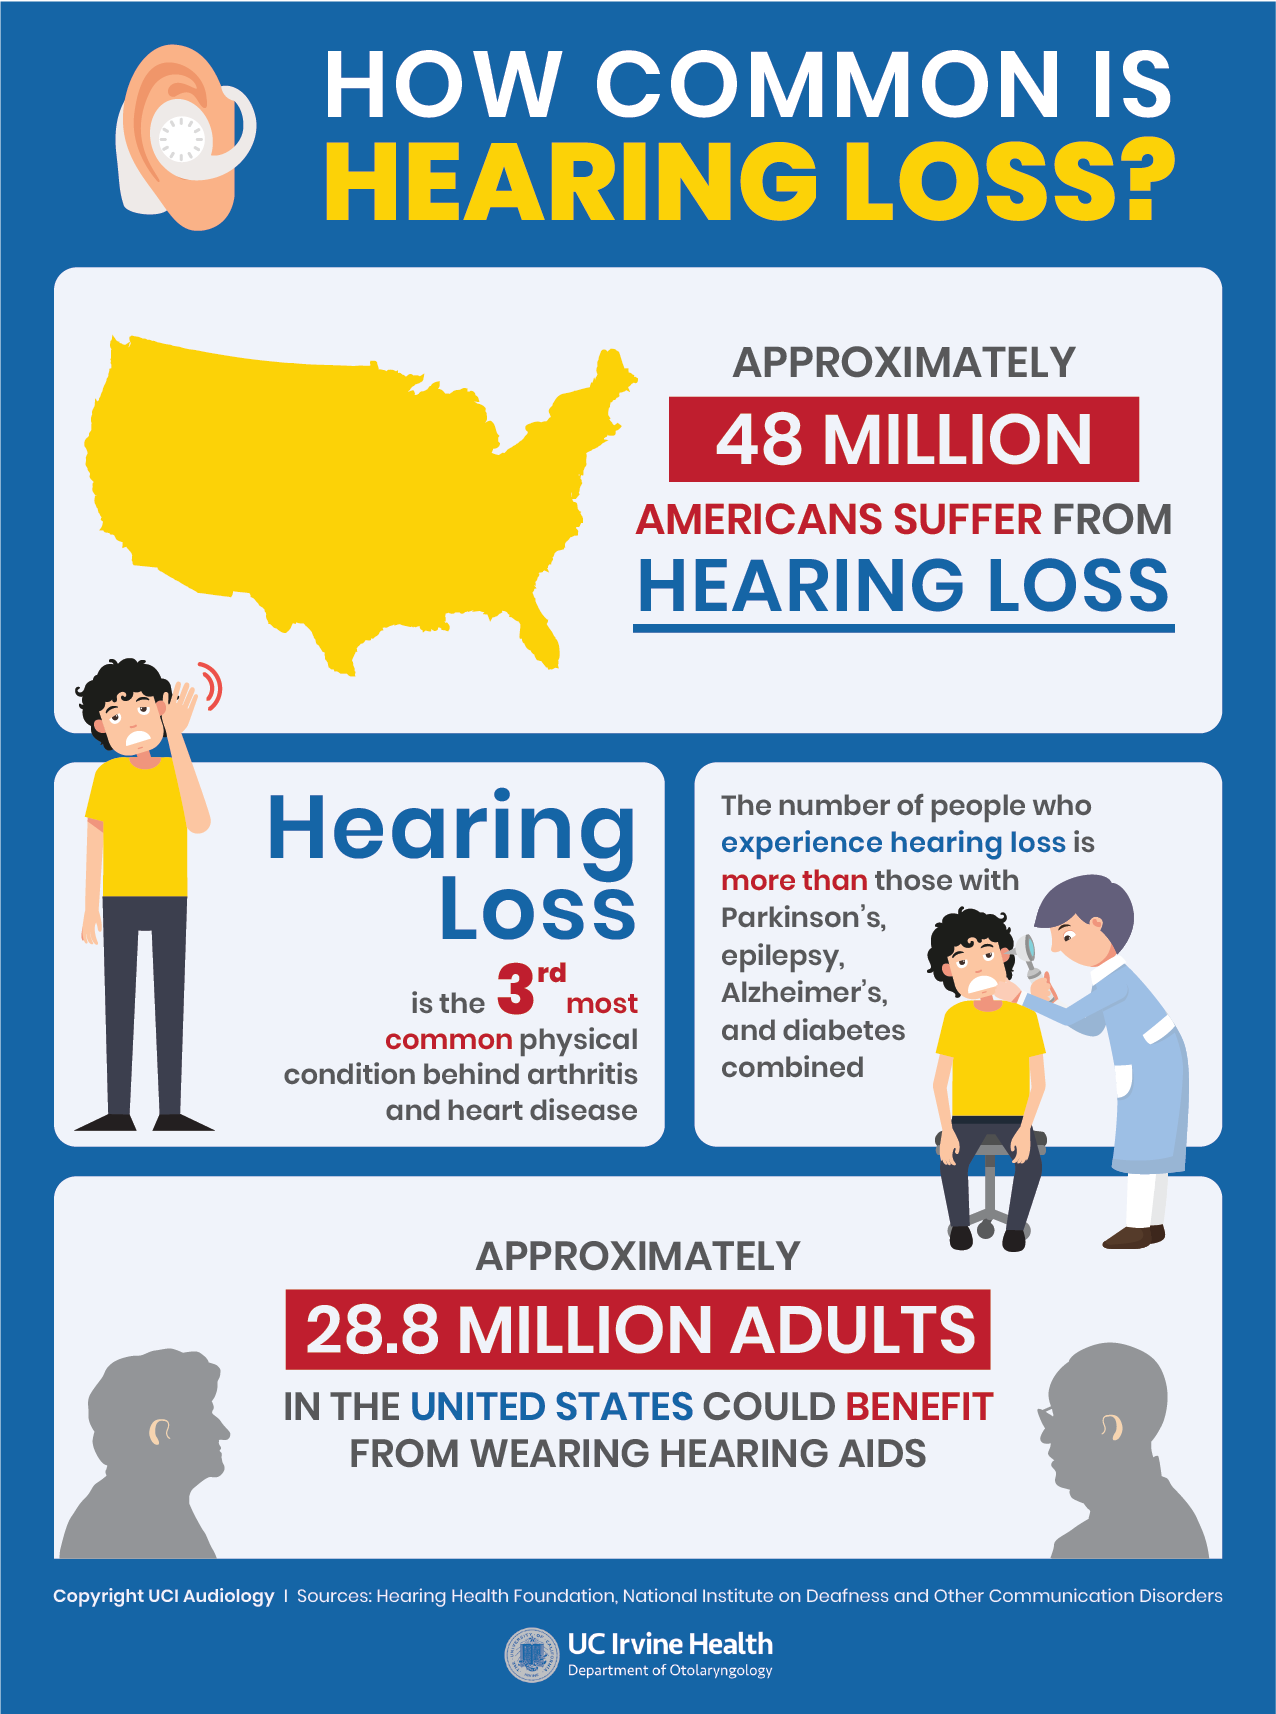 hearing loss statistics - an infographic showing how hearing loss affects those in the U.S.